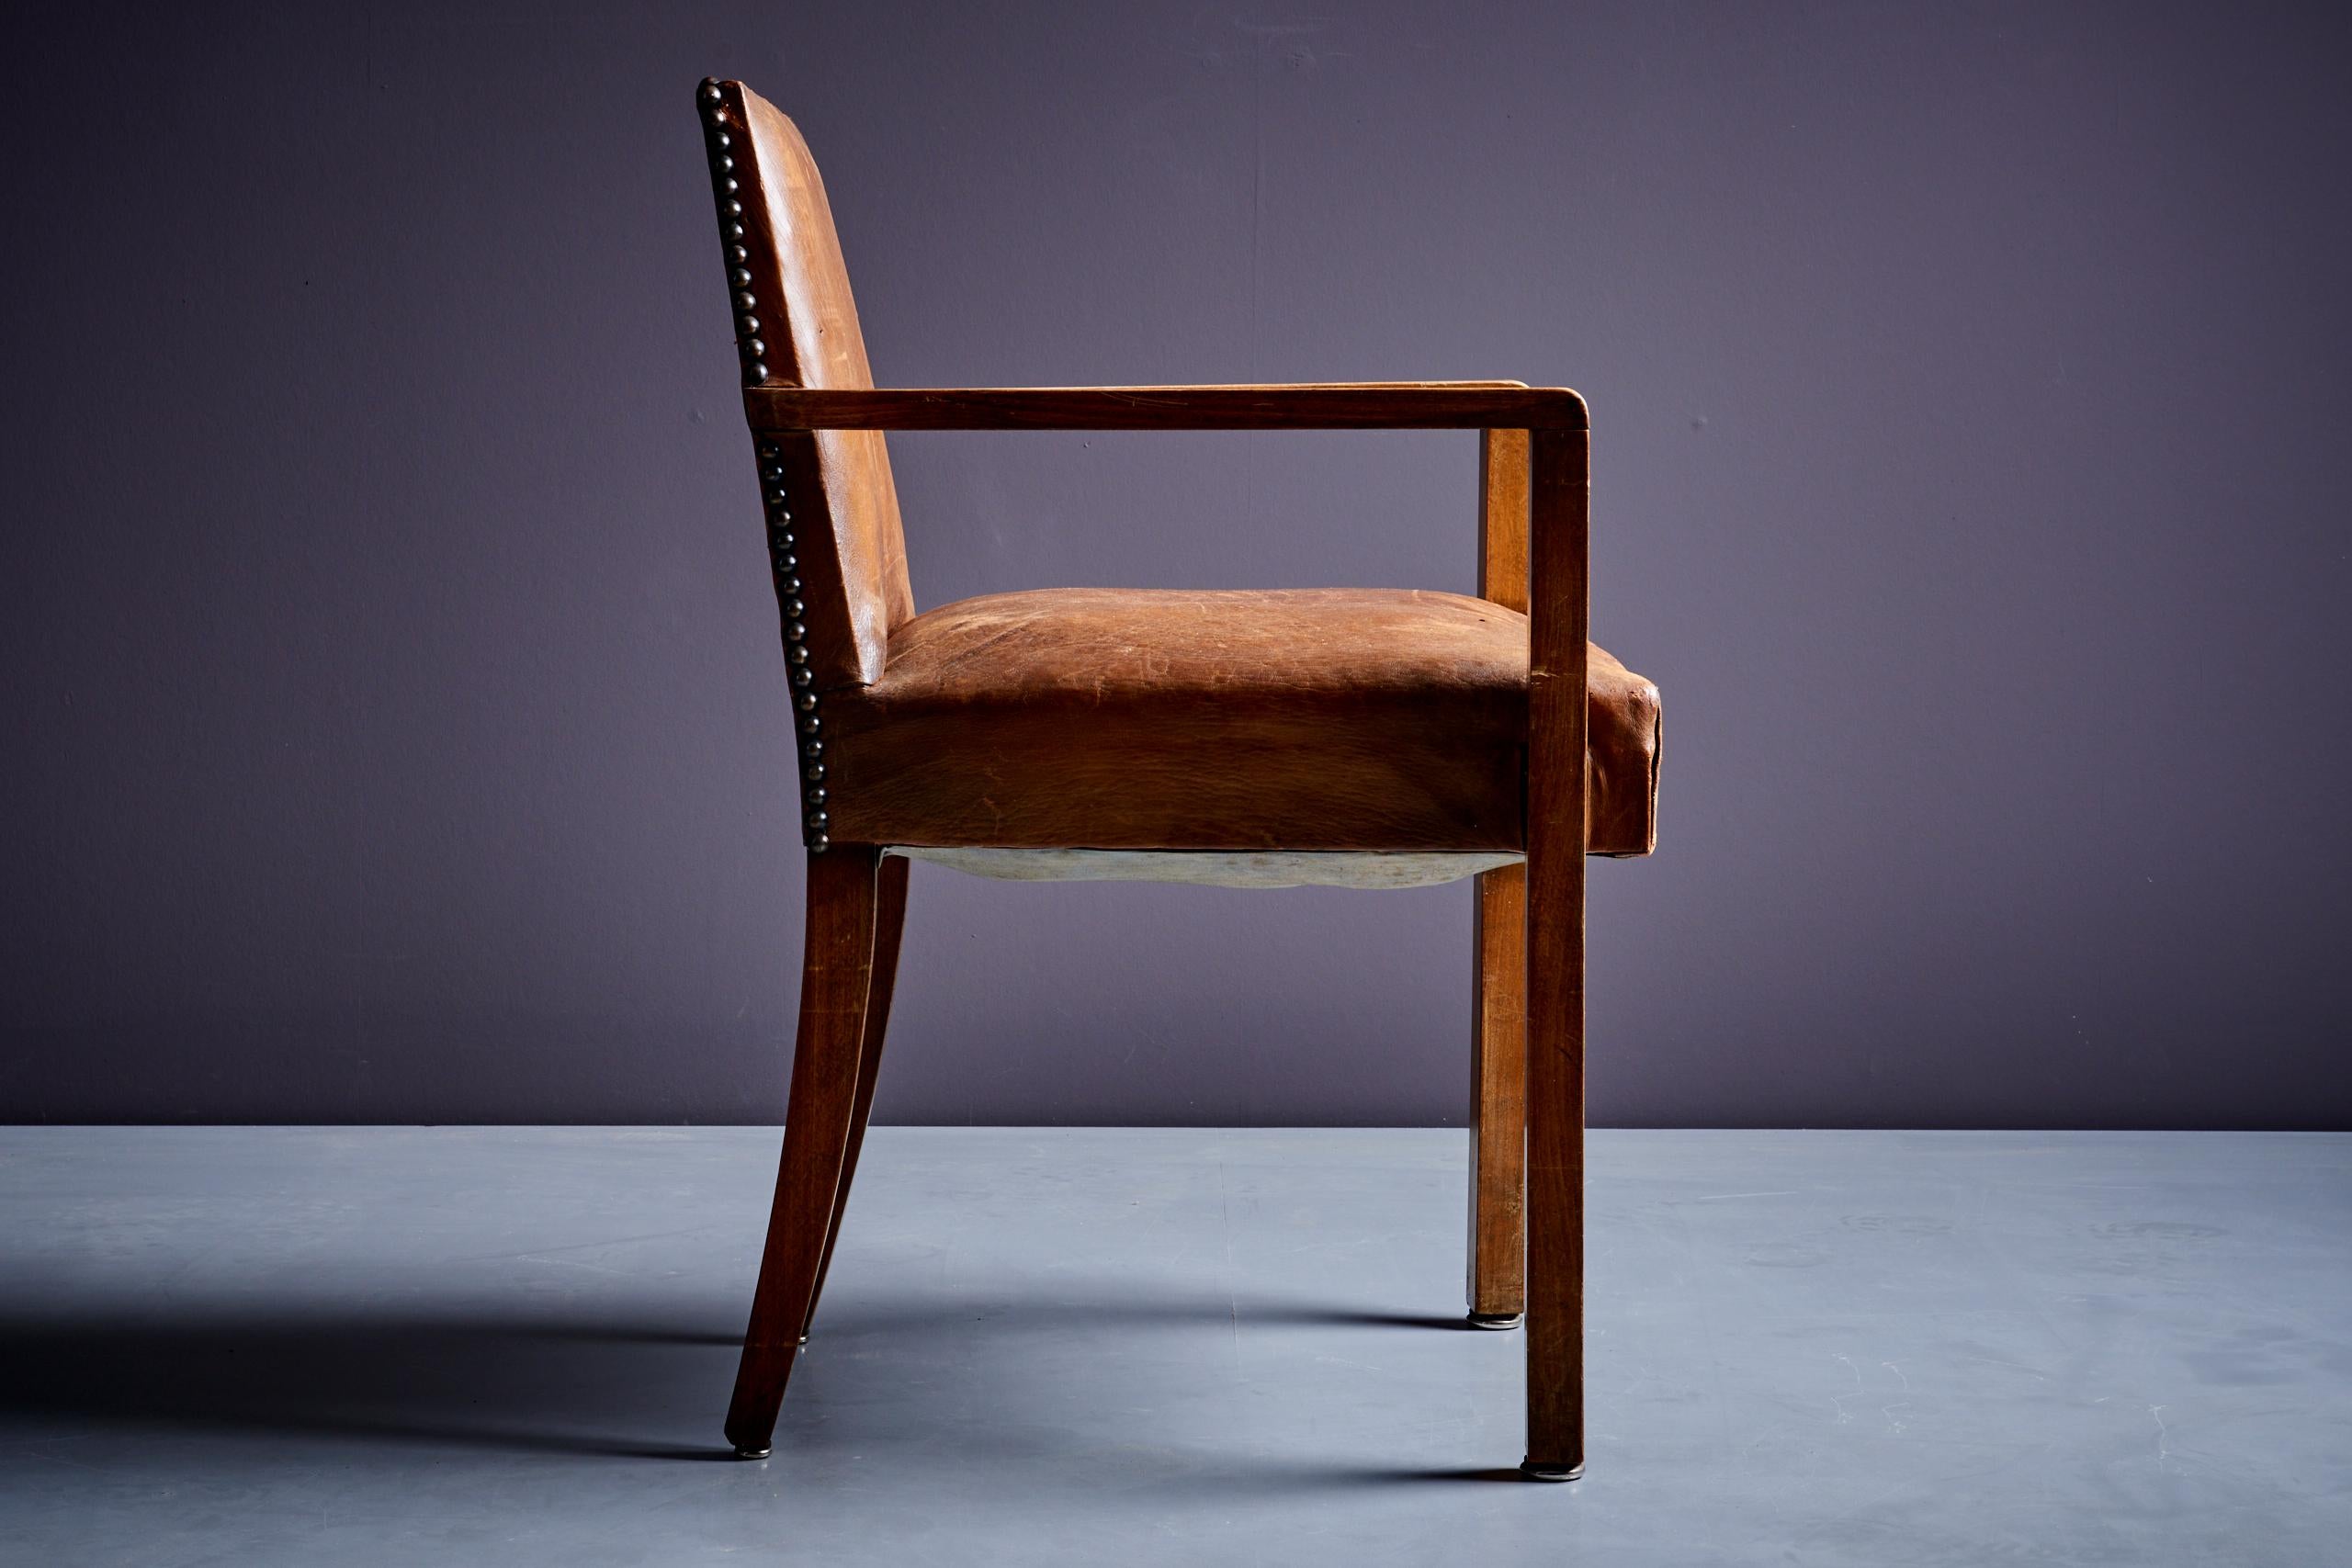 Mid-20th Century Art Deco Arm Chair attributed to Francis Jourdain 1940s brown leather For Sale